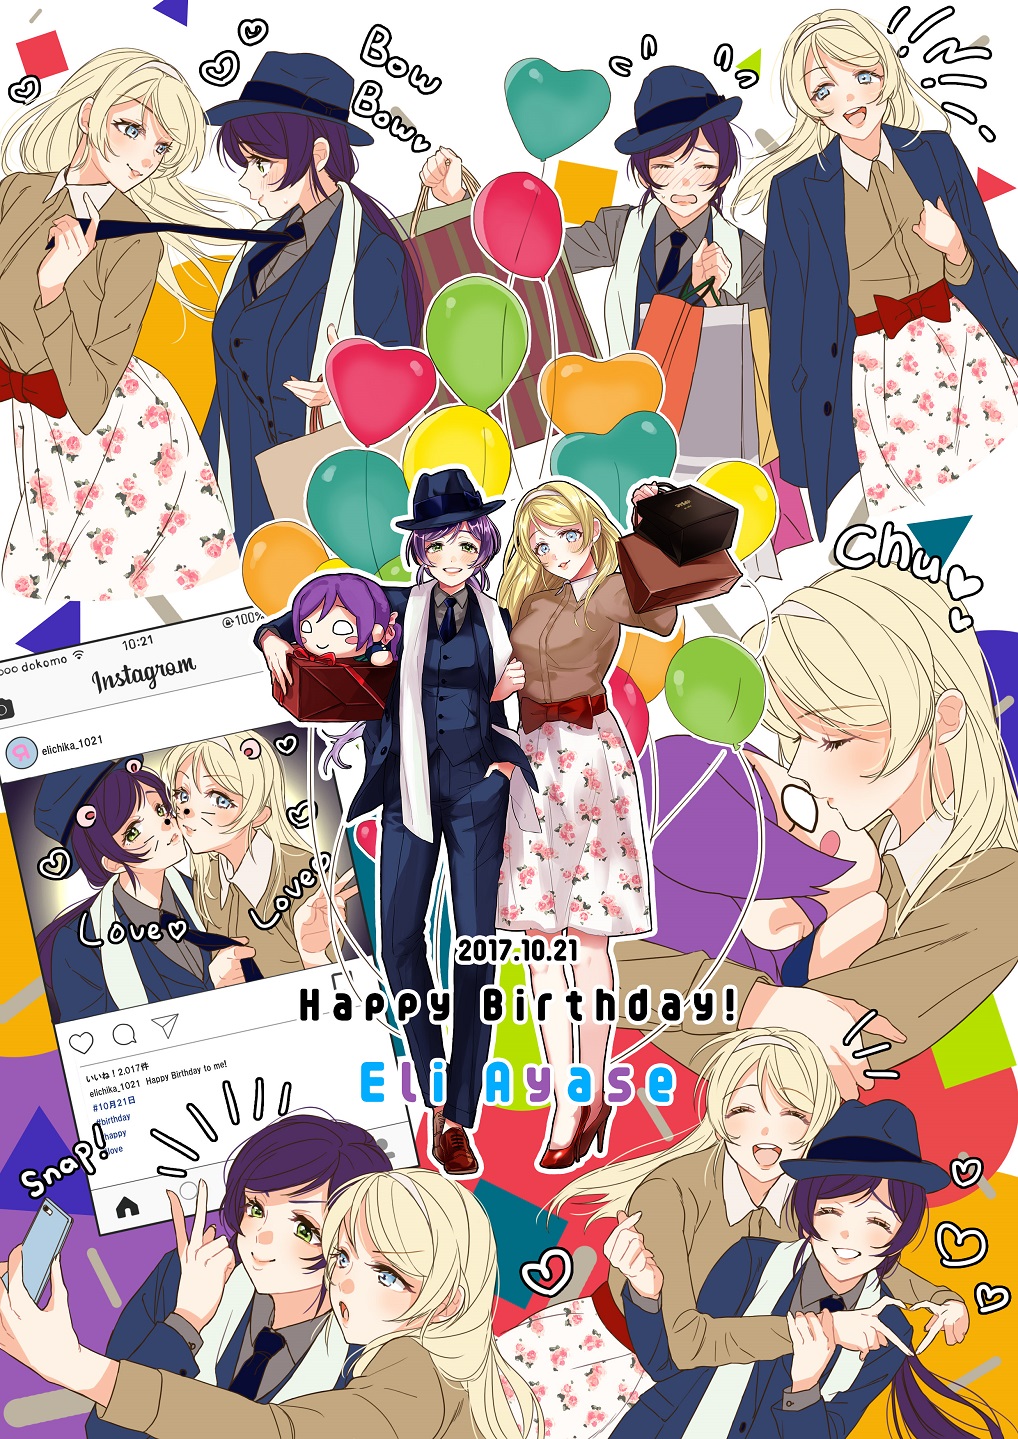 2girls ^_^ alternate_hairstyle ayase_eli bag balloon blonde_hair blue_eyes blush blush_stickers bow box carrying_bag character_doll clenched_hand closed_eyes dating fake_screenshot fedora floral_print formal gift gift_box green_eyes grin hair_down hairband hand_in_pocket hand_on_another's_arm happy_birthday hat heart heart_balloon heart_hands high_heels highres hug hug_from_behind instagram jacket jacket_on_shoulders kiss long_hair long_sleeves looking_at_another love_live! love_live!_school_idol_project multiple_girls multiple_views necktie necktie_grab neckwear_grab pants ponytail print_skirt purple_hair red_bow red_footwear self_shot shopping_bag skirt smile suit toujou_nozomi v yuri zawawa_(satoukibi1108)